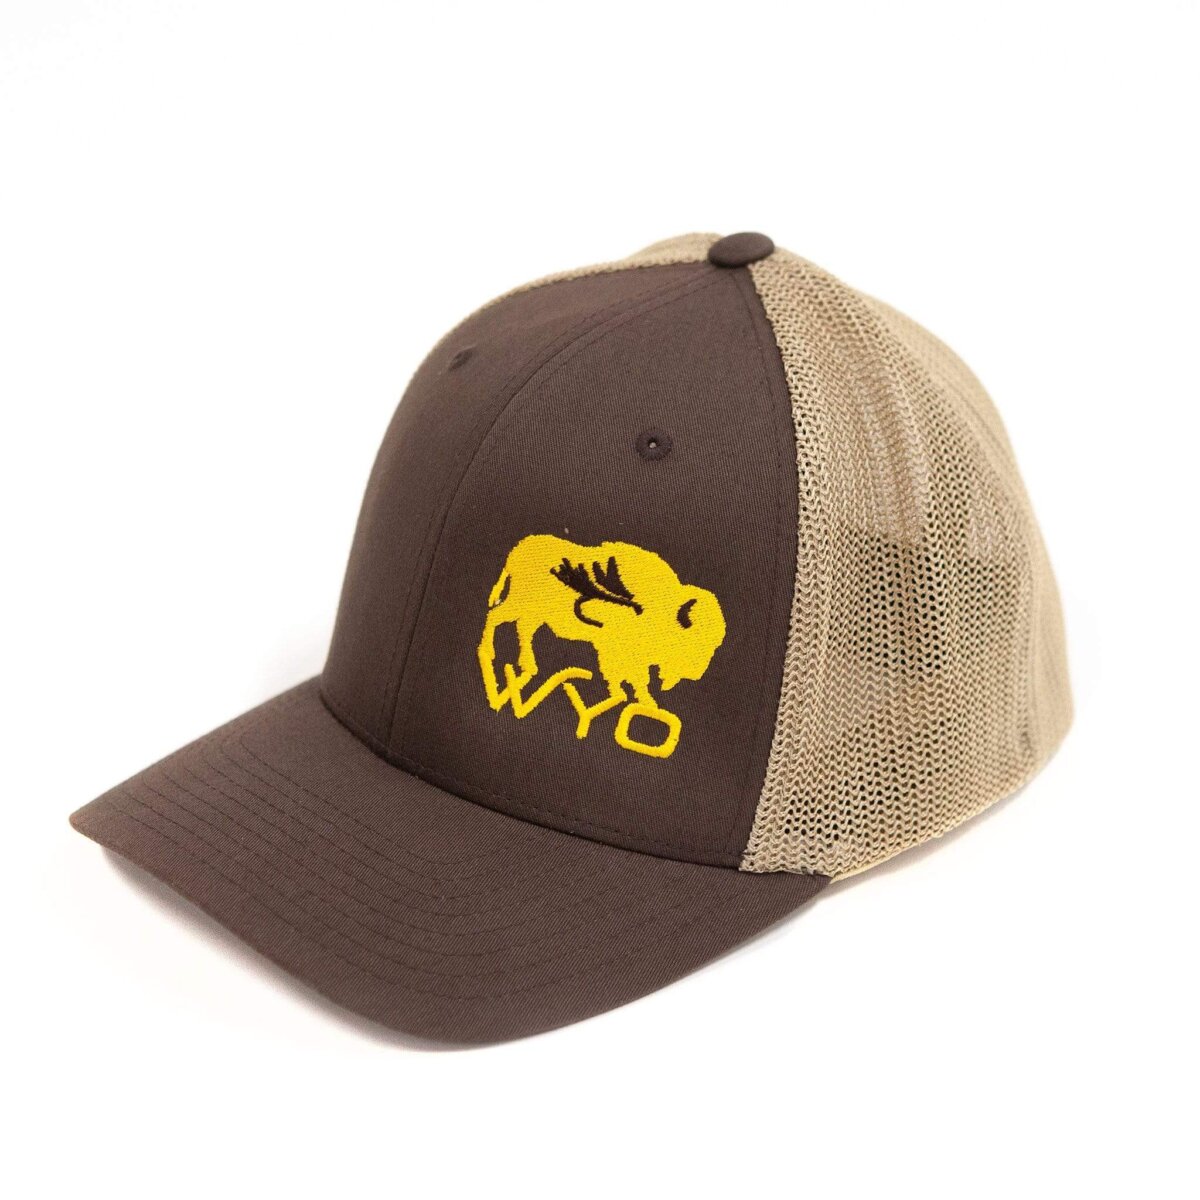 Bison Gold and - Mesh Hat Wyoming Flex-Fit Fly Shop - Wyo Brown